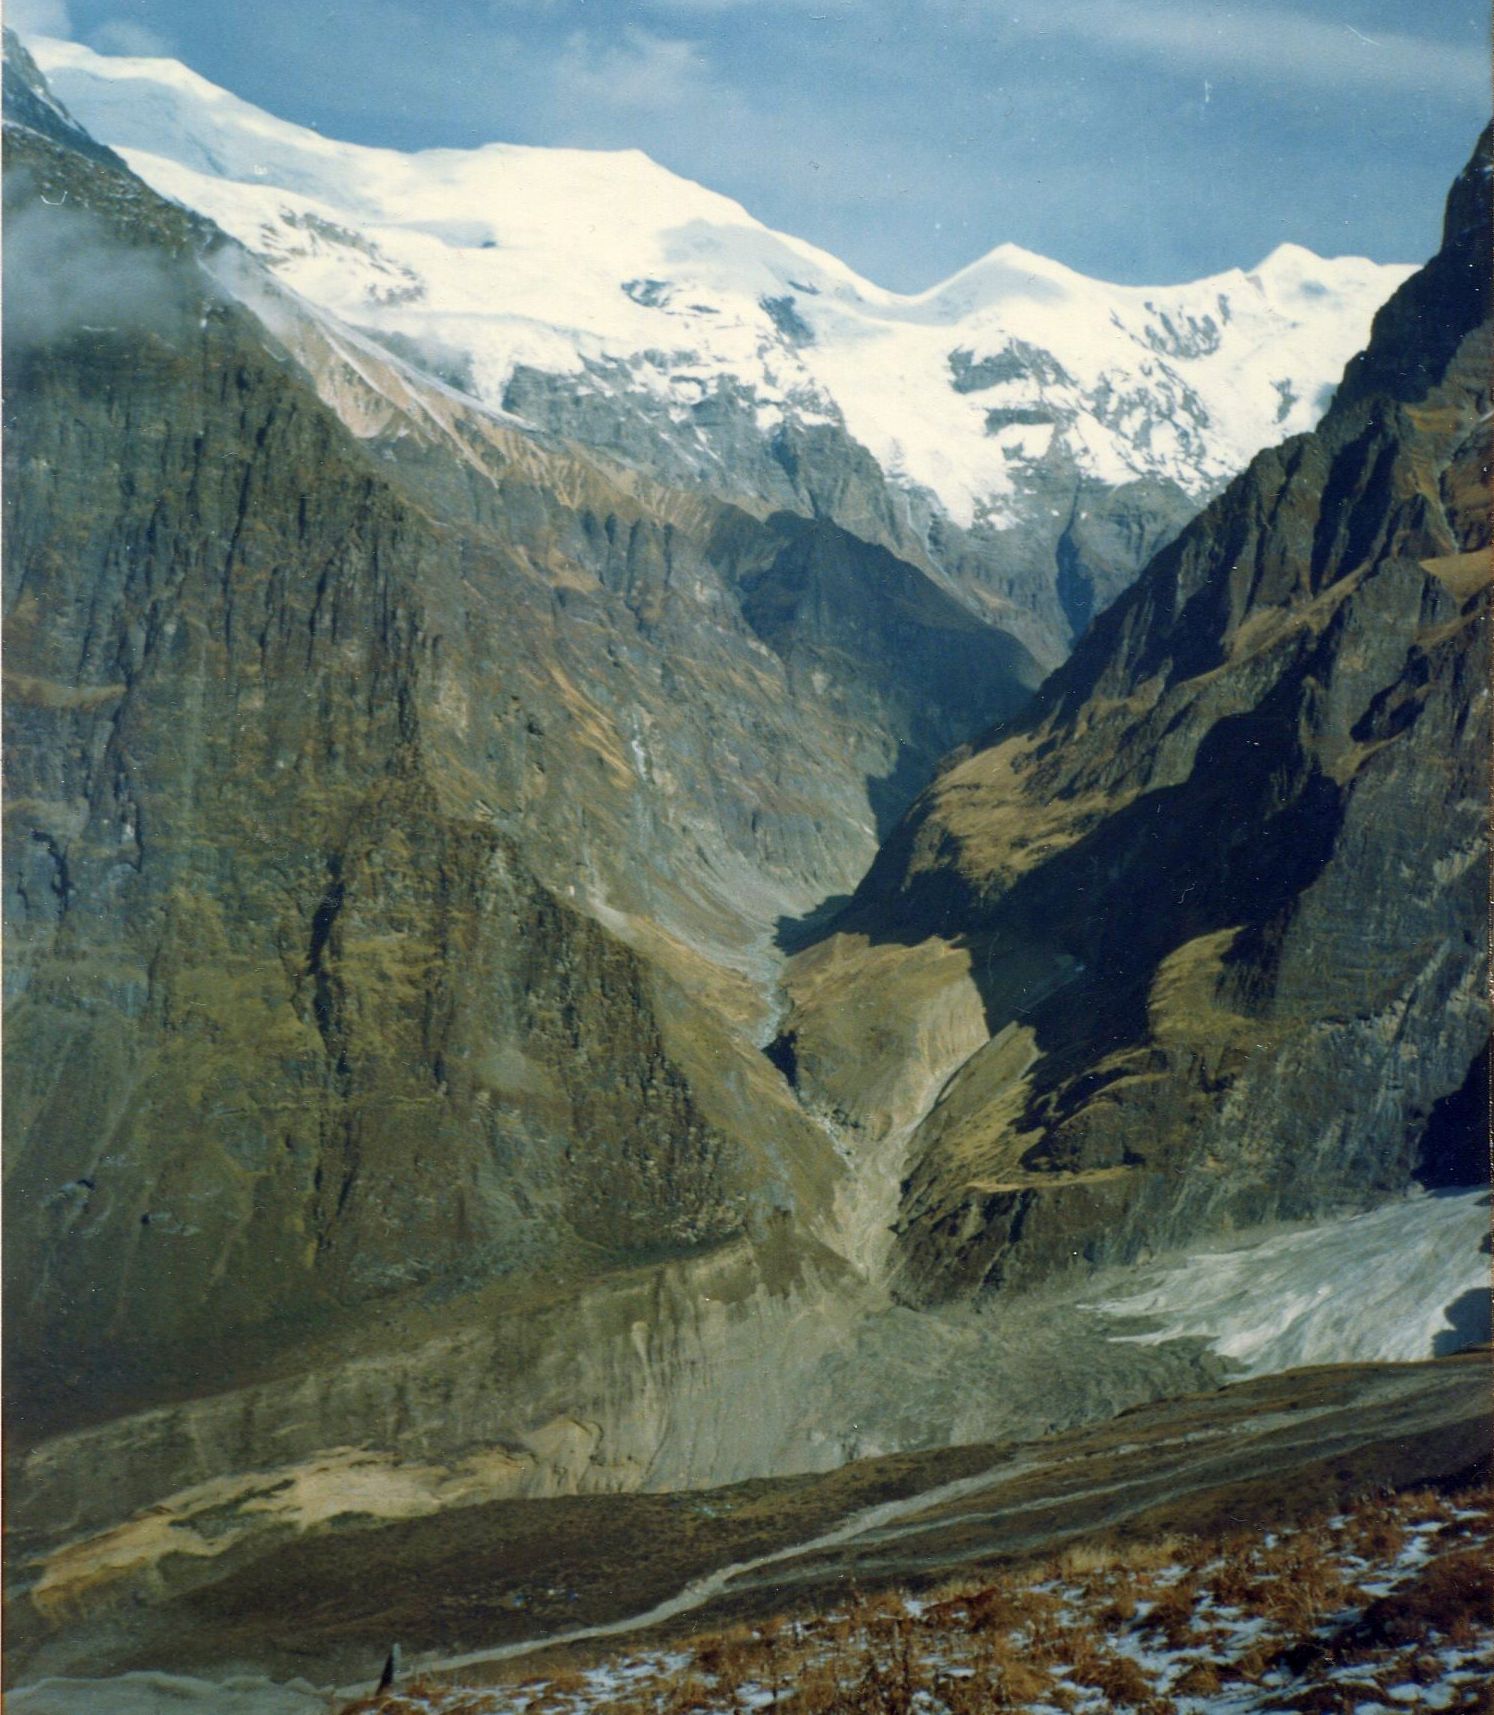 Approach to Chonbarden Glacier from above Italian Base Camp